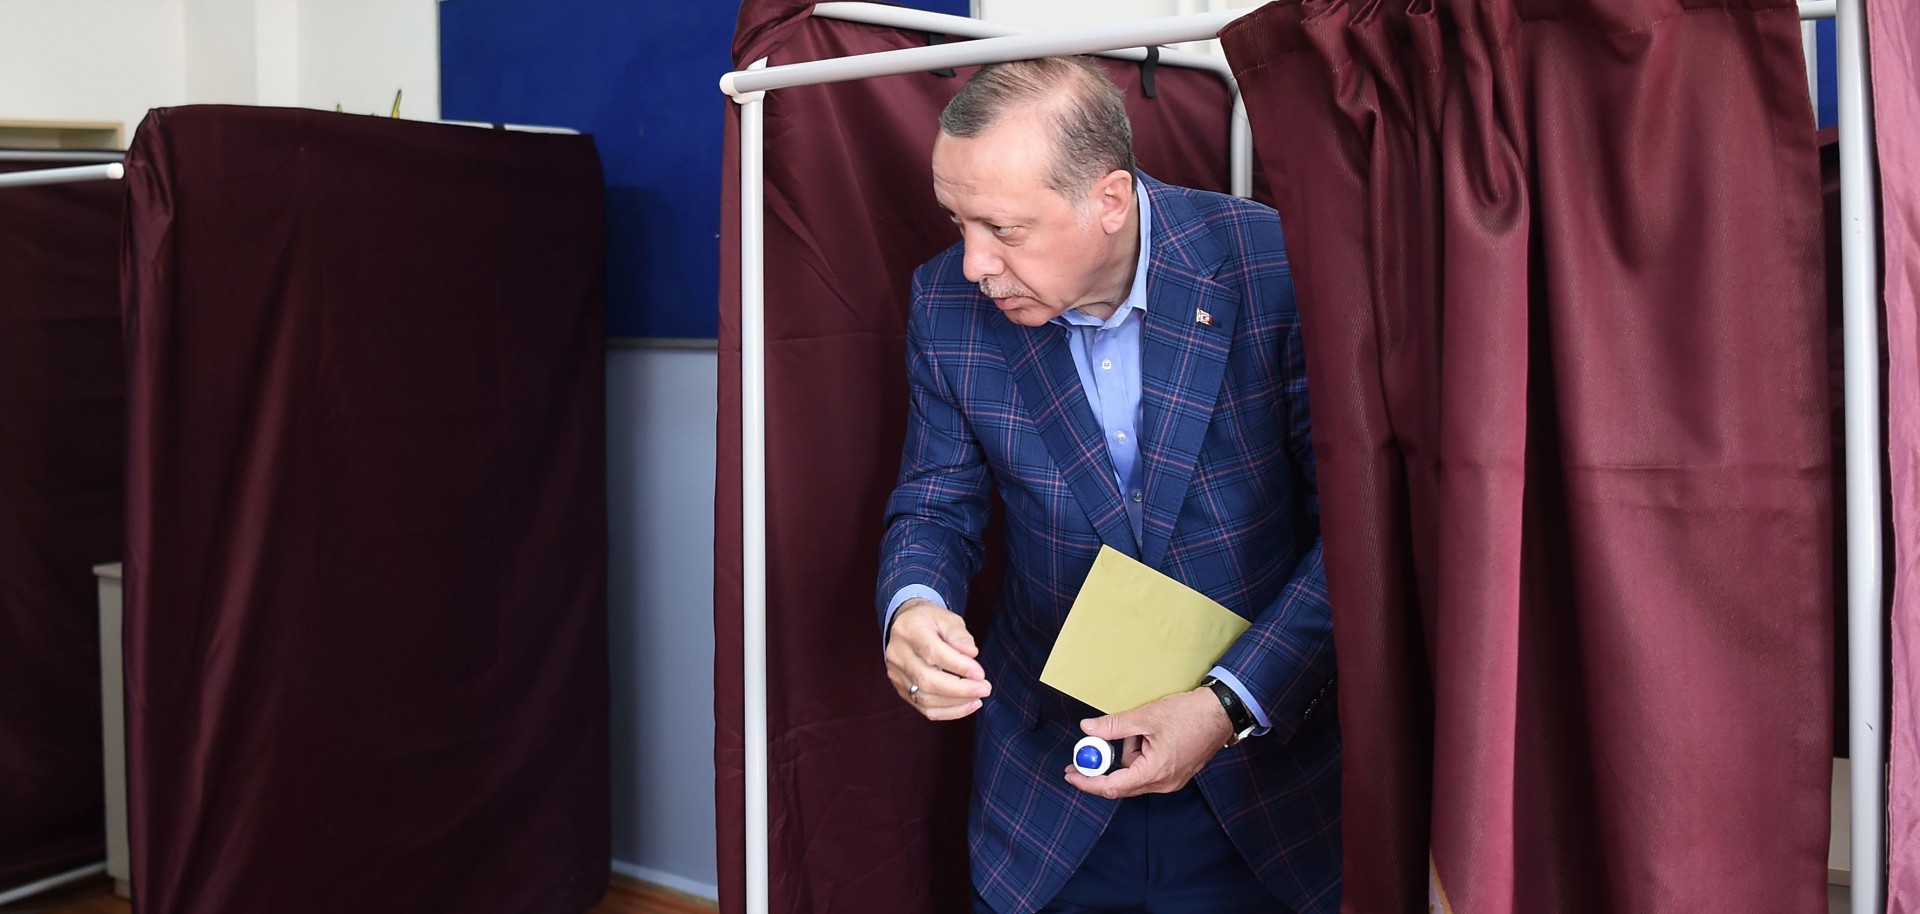 Turkish President Recep Tayyip Erdogan emerges from a voting booth.